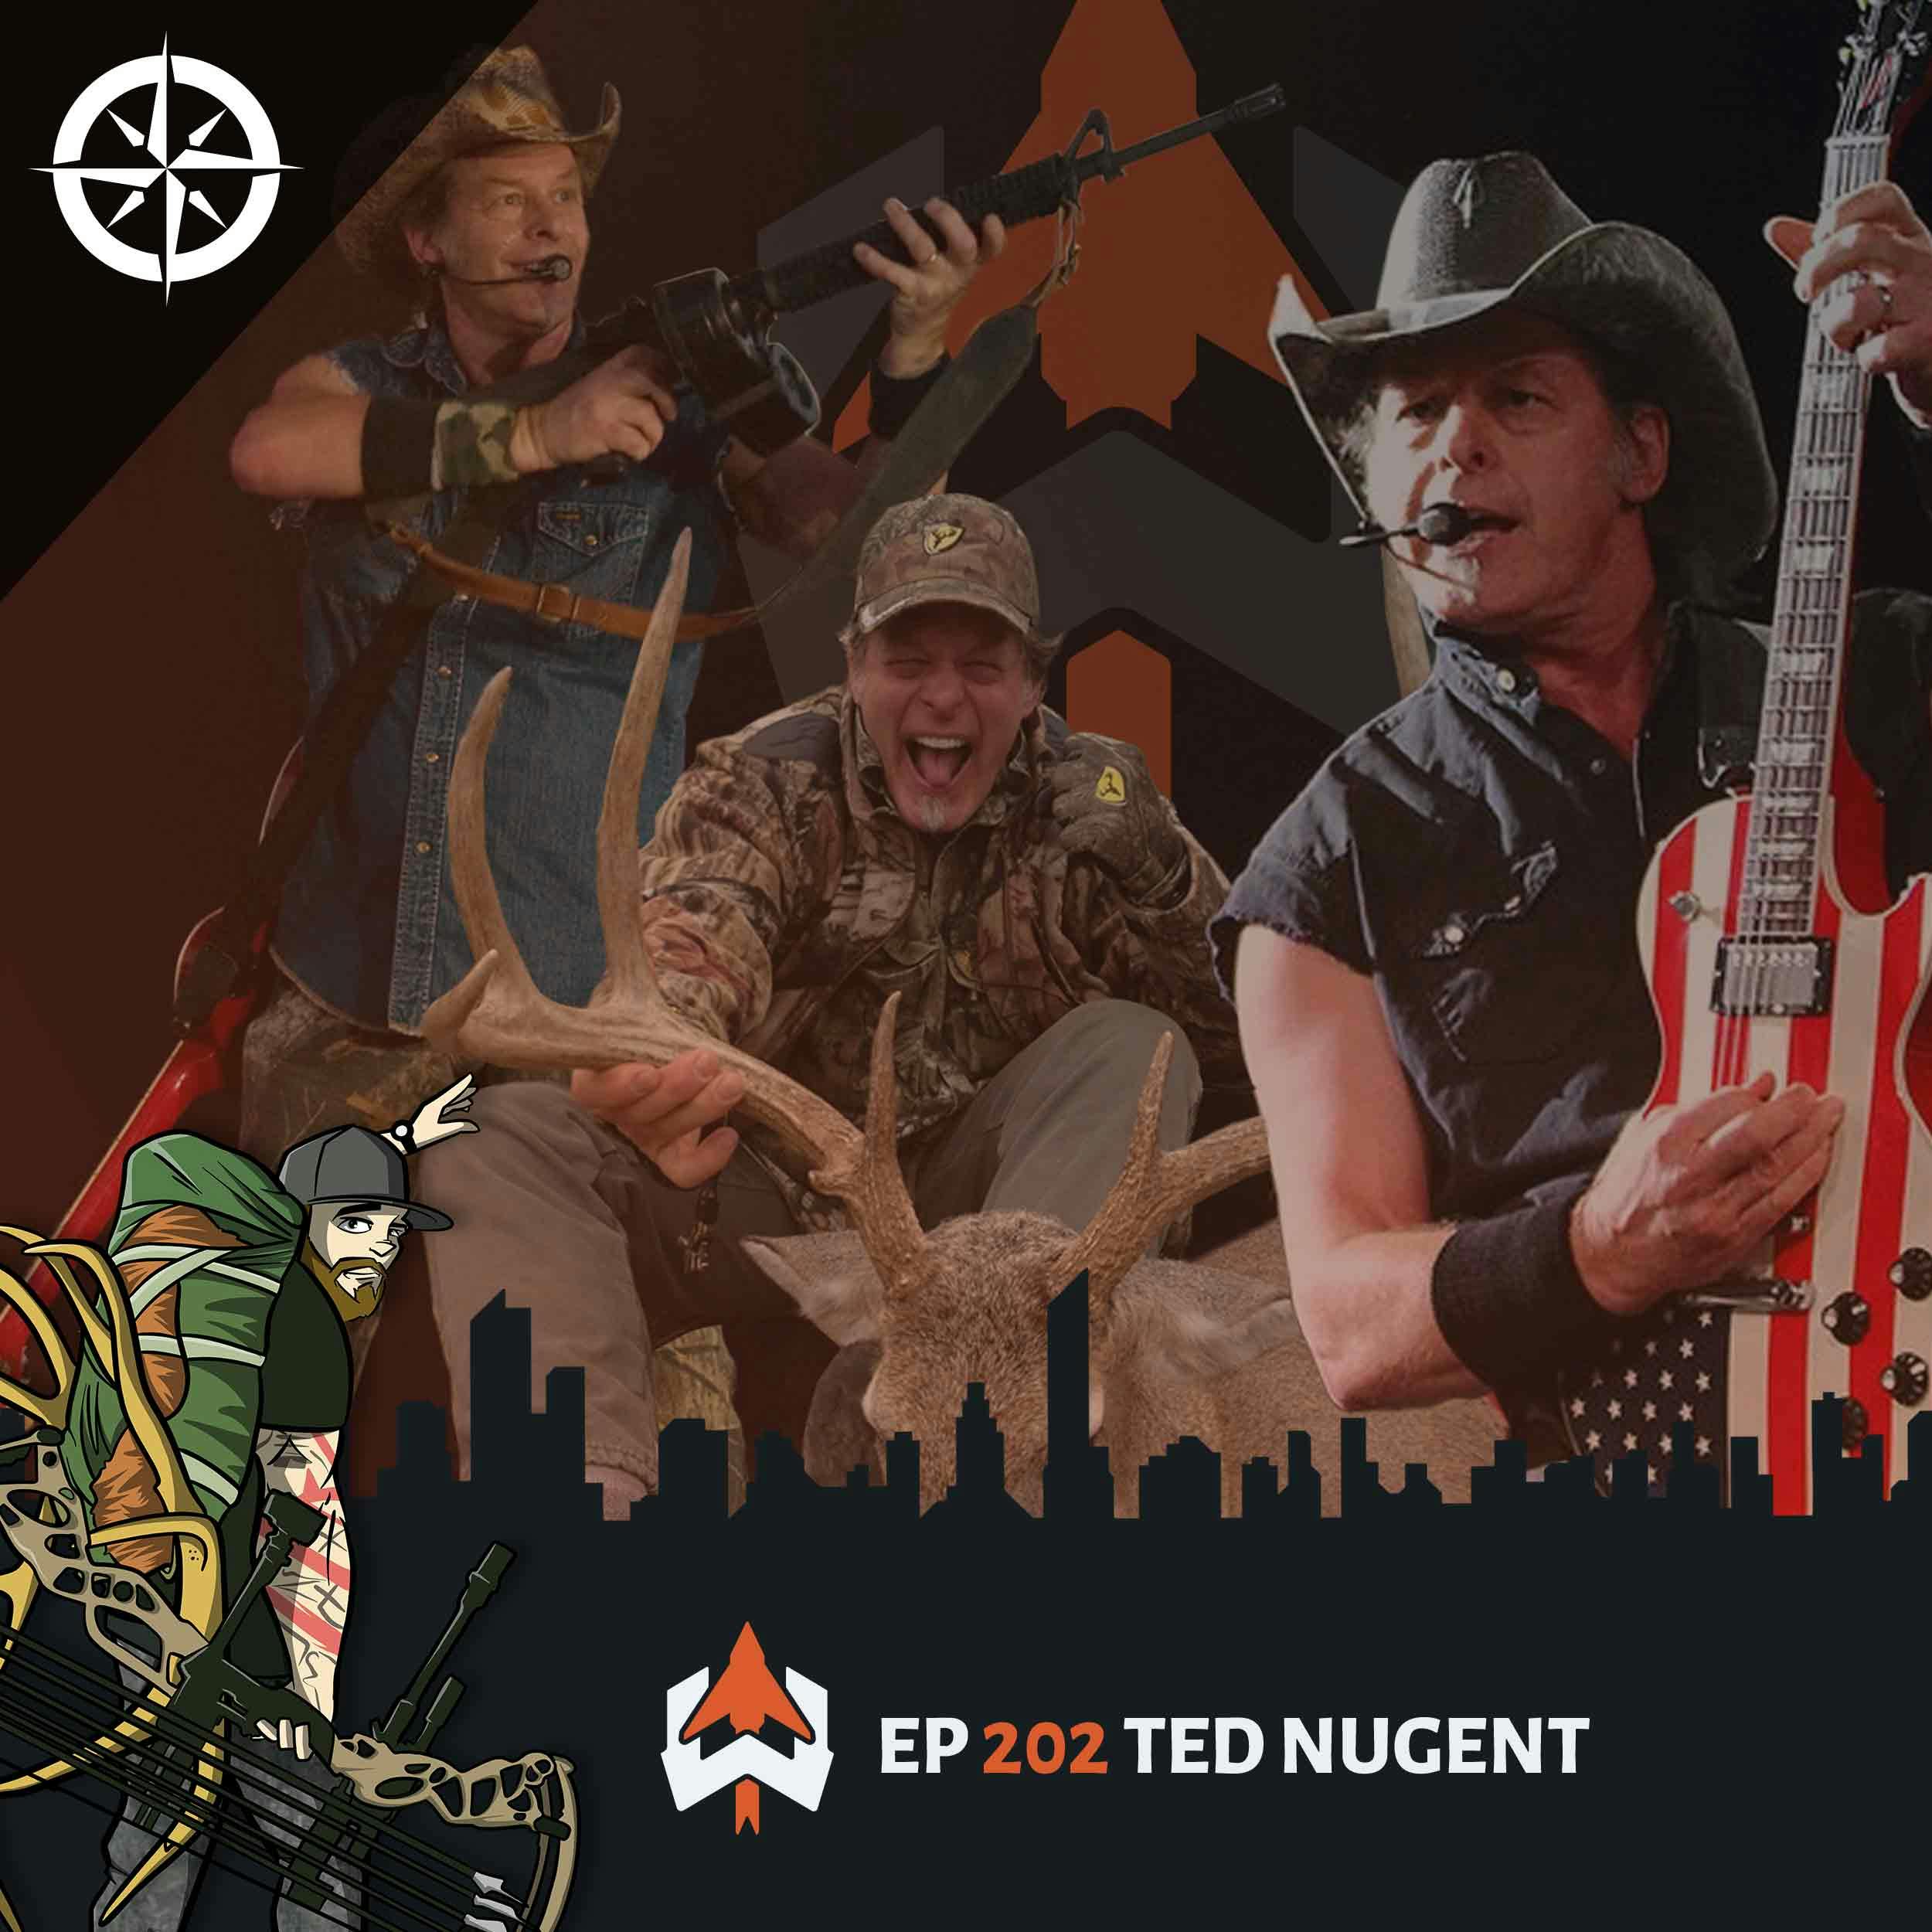 Ep 202 - Ted Nugent: A Very American Tirade